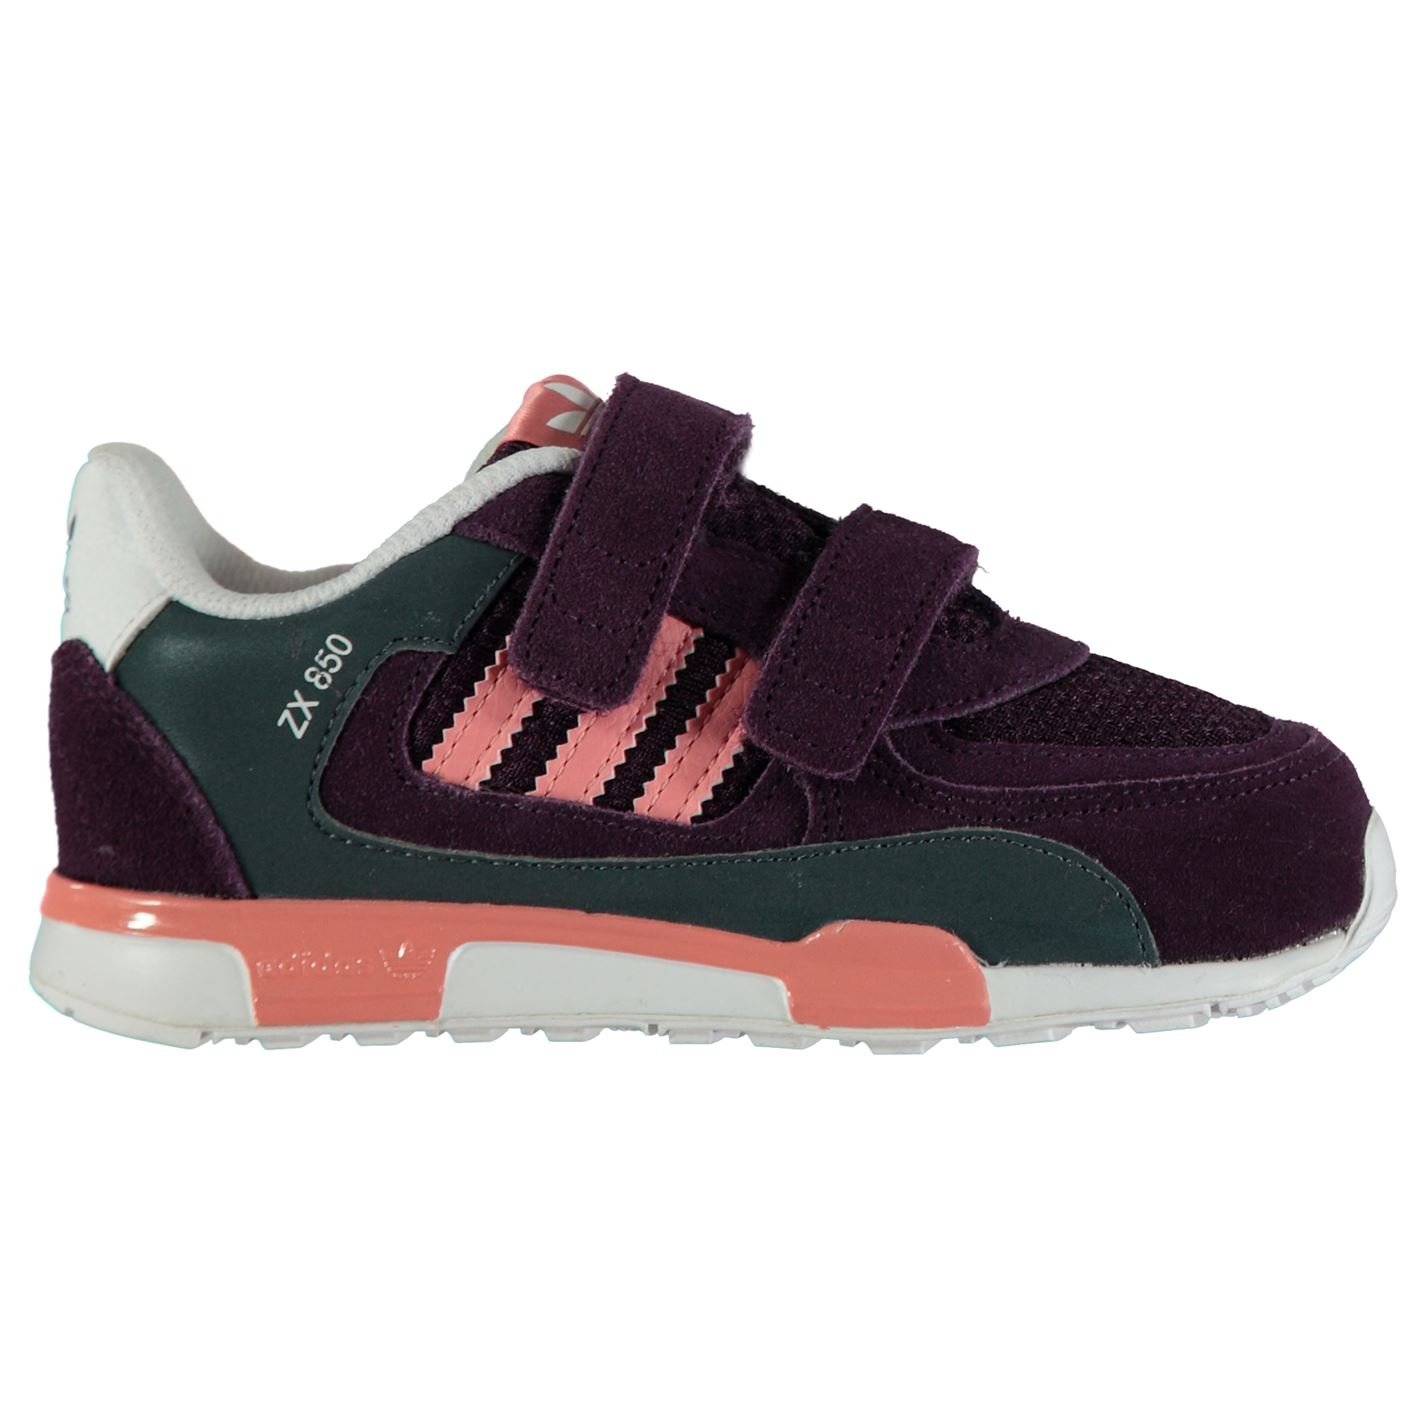 Adidas ZX 850 CF Trainers